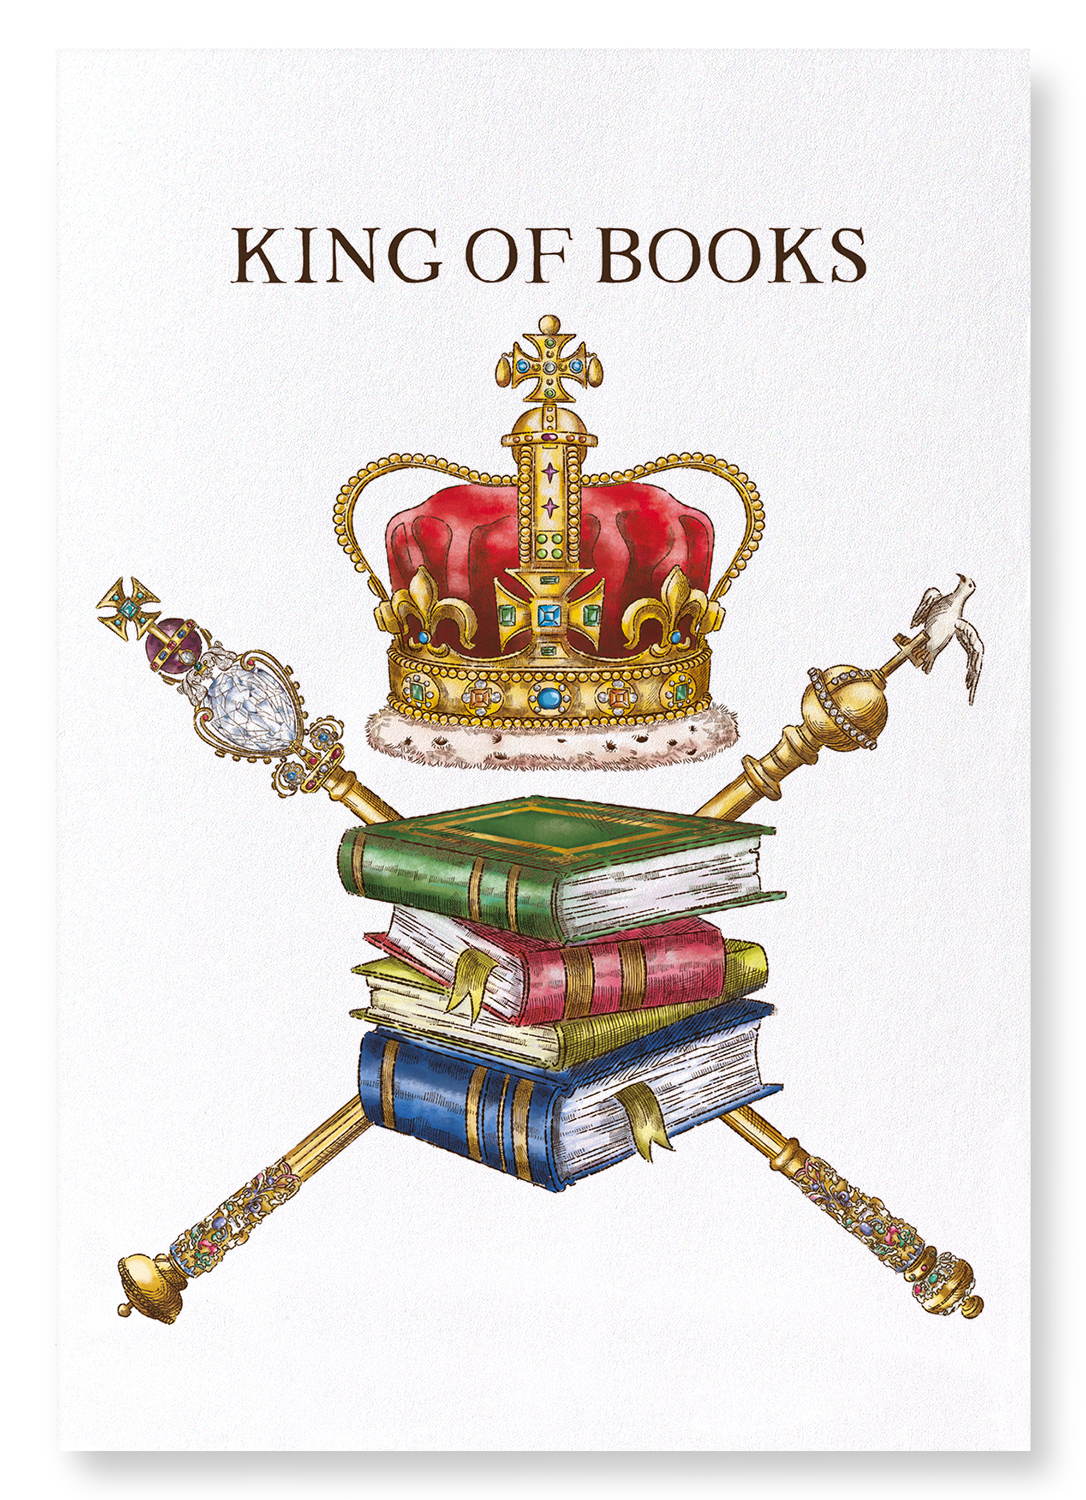 KING OF BOOKS